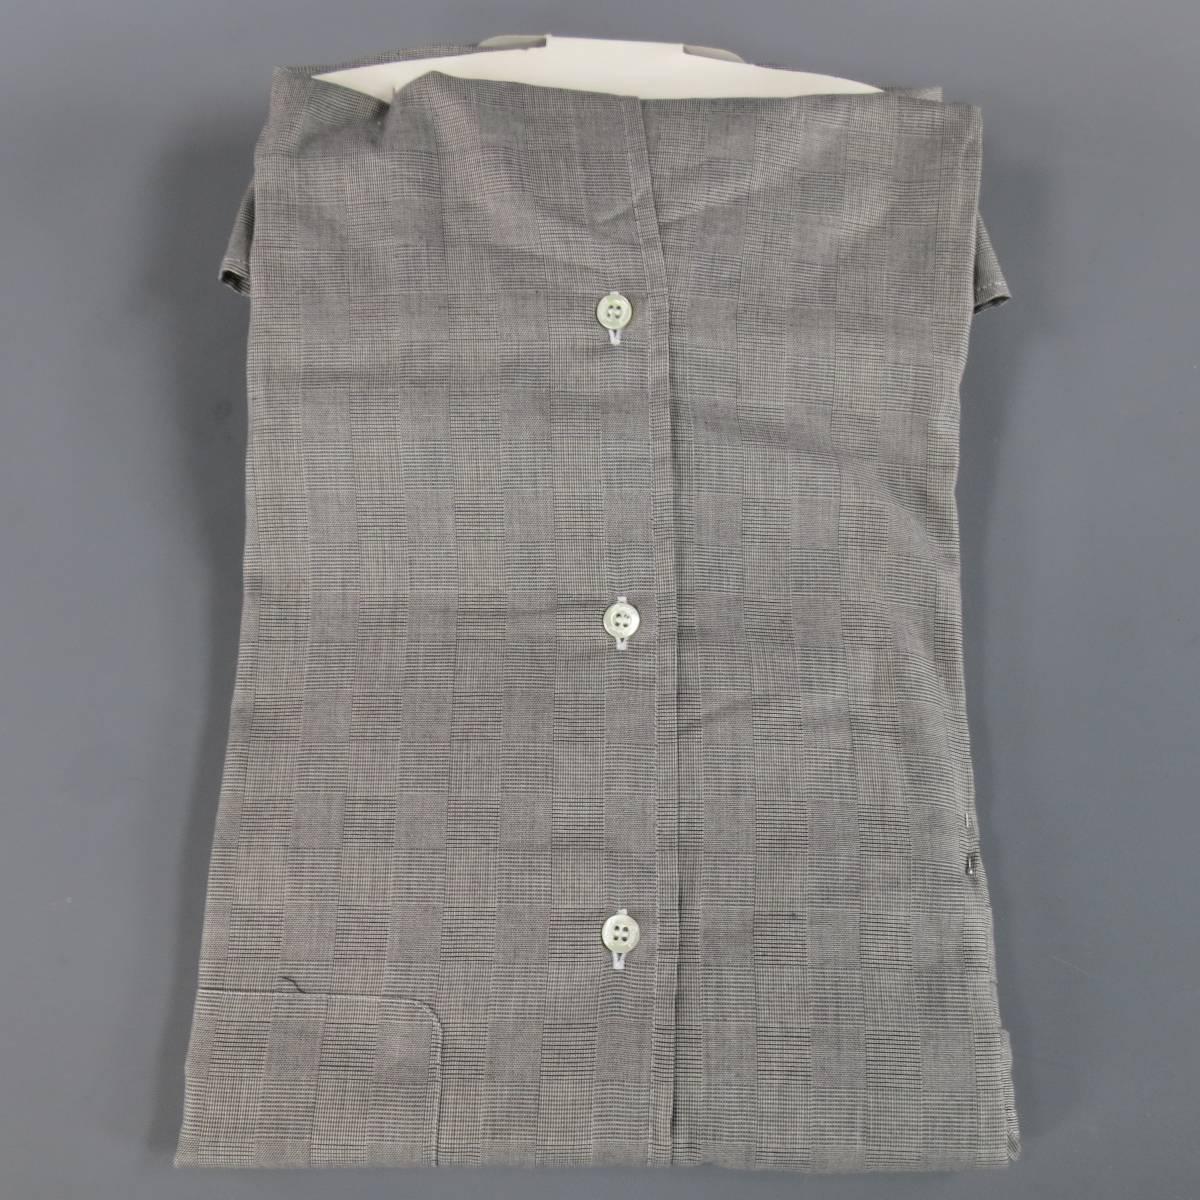 BRIONI Sport Long Sleeve Shirt consists of cotton material in a grey color tone. Designed in a button-up front, patch pocket and pointed collar. Detailed with a checkered pattern and contrast stitching. New with tags. Made in Italy.
 
New Pre-Owned